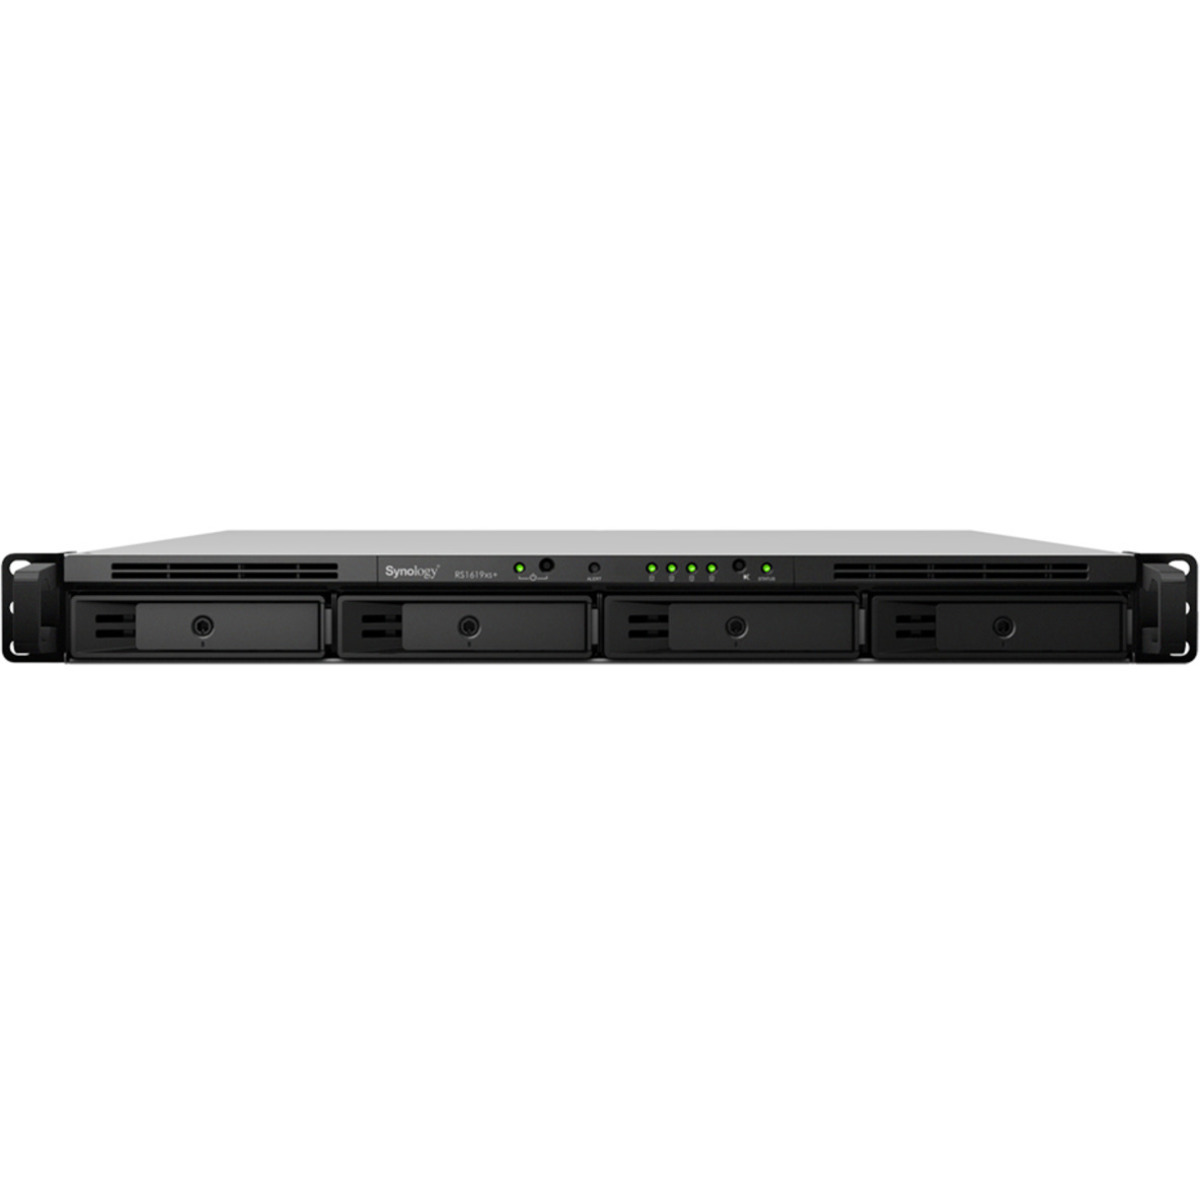 Synology RackStation RS1619xs+ 88tb 4-Bay RackMount Multimedia / Power User / Business NAS - Network Attached Storage Device 4x22tb Western Digital Ultrastar HC580 SED WUH722422ALE6L1 3.5 7200rpm SATA 6Gb/s HDD ENTERPRISE Class Drives Installed - Burn-In Tested RackStation RS1619xs+